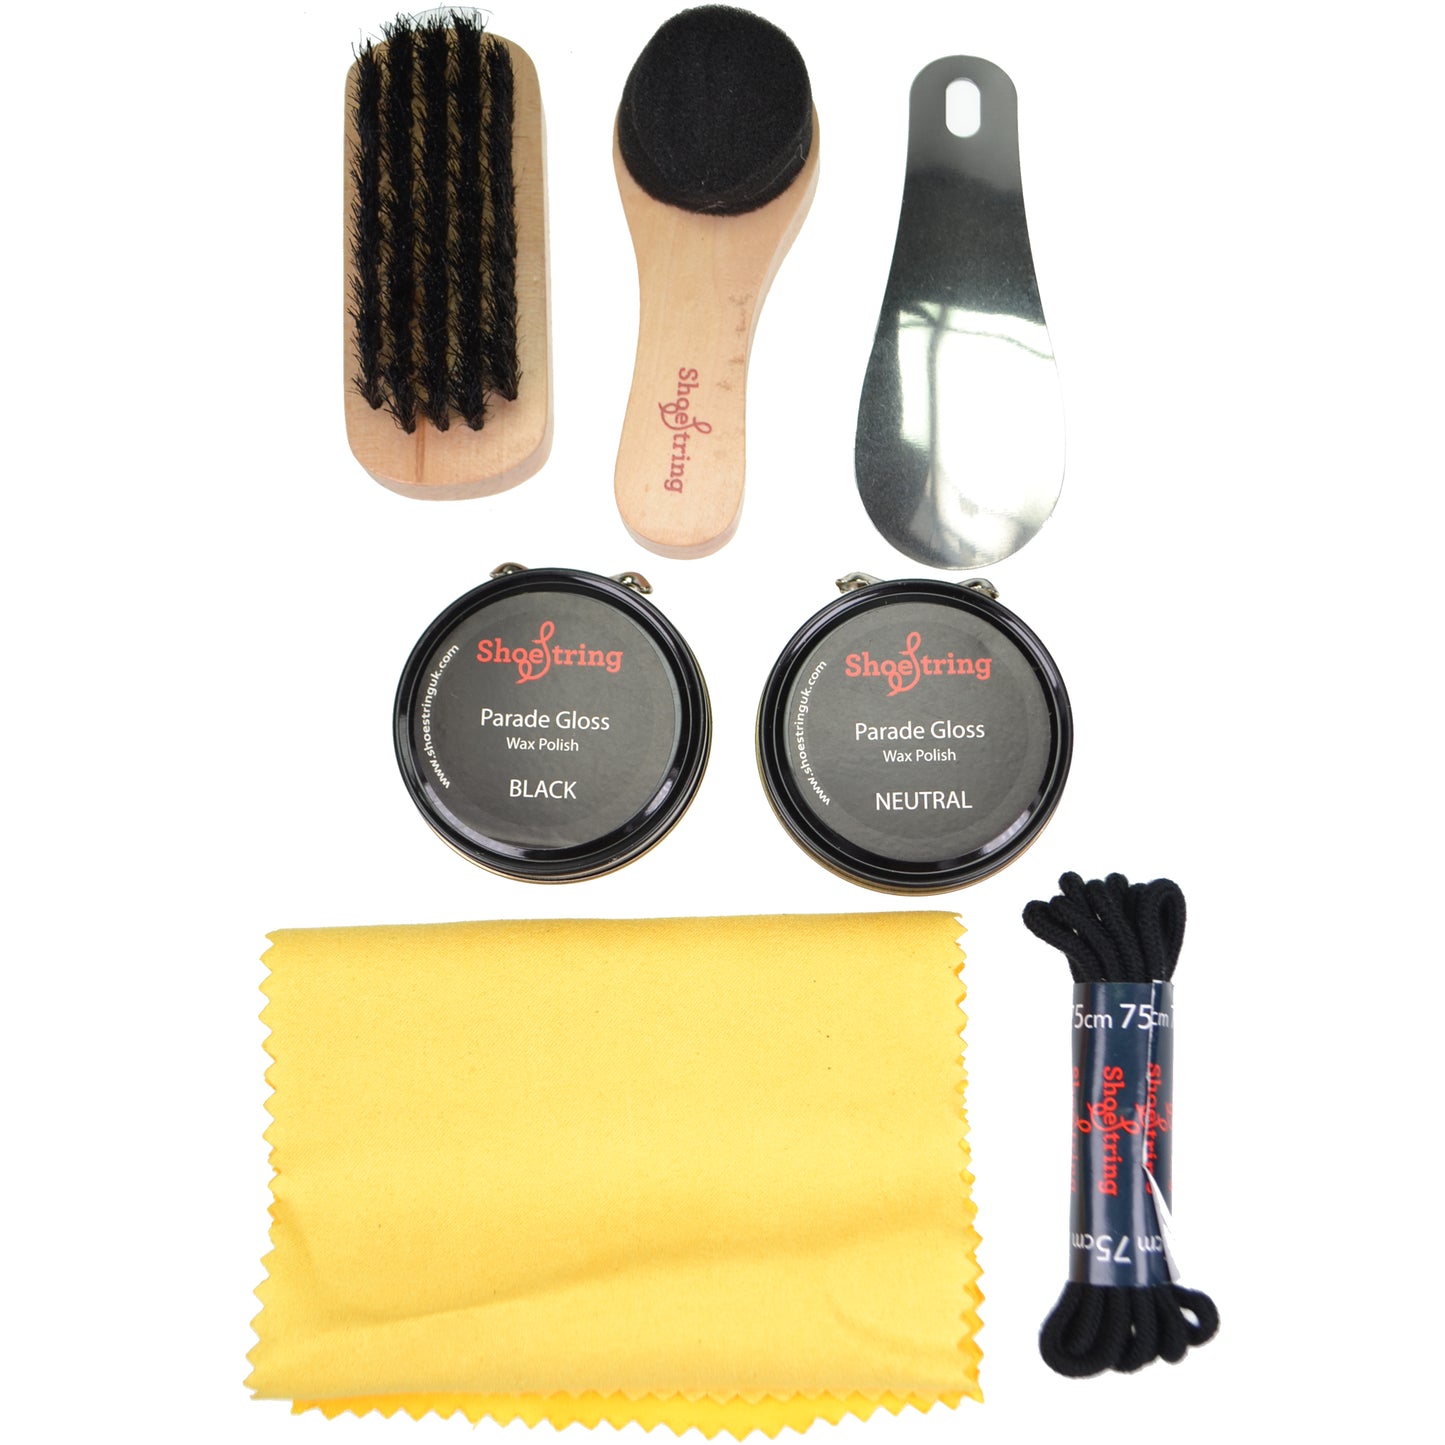 Shoe Cleaning Kit - Barrel Shaped Leather Style Shoe Cleaning Kit with Contents